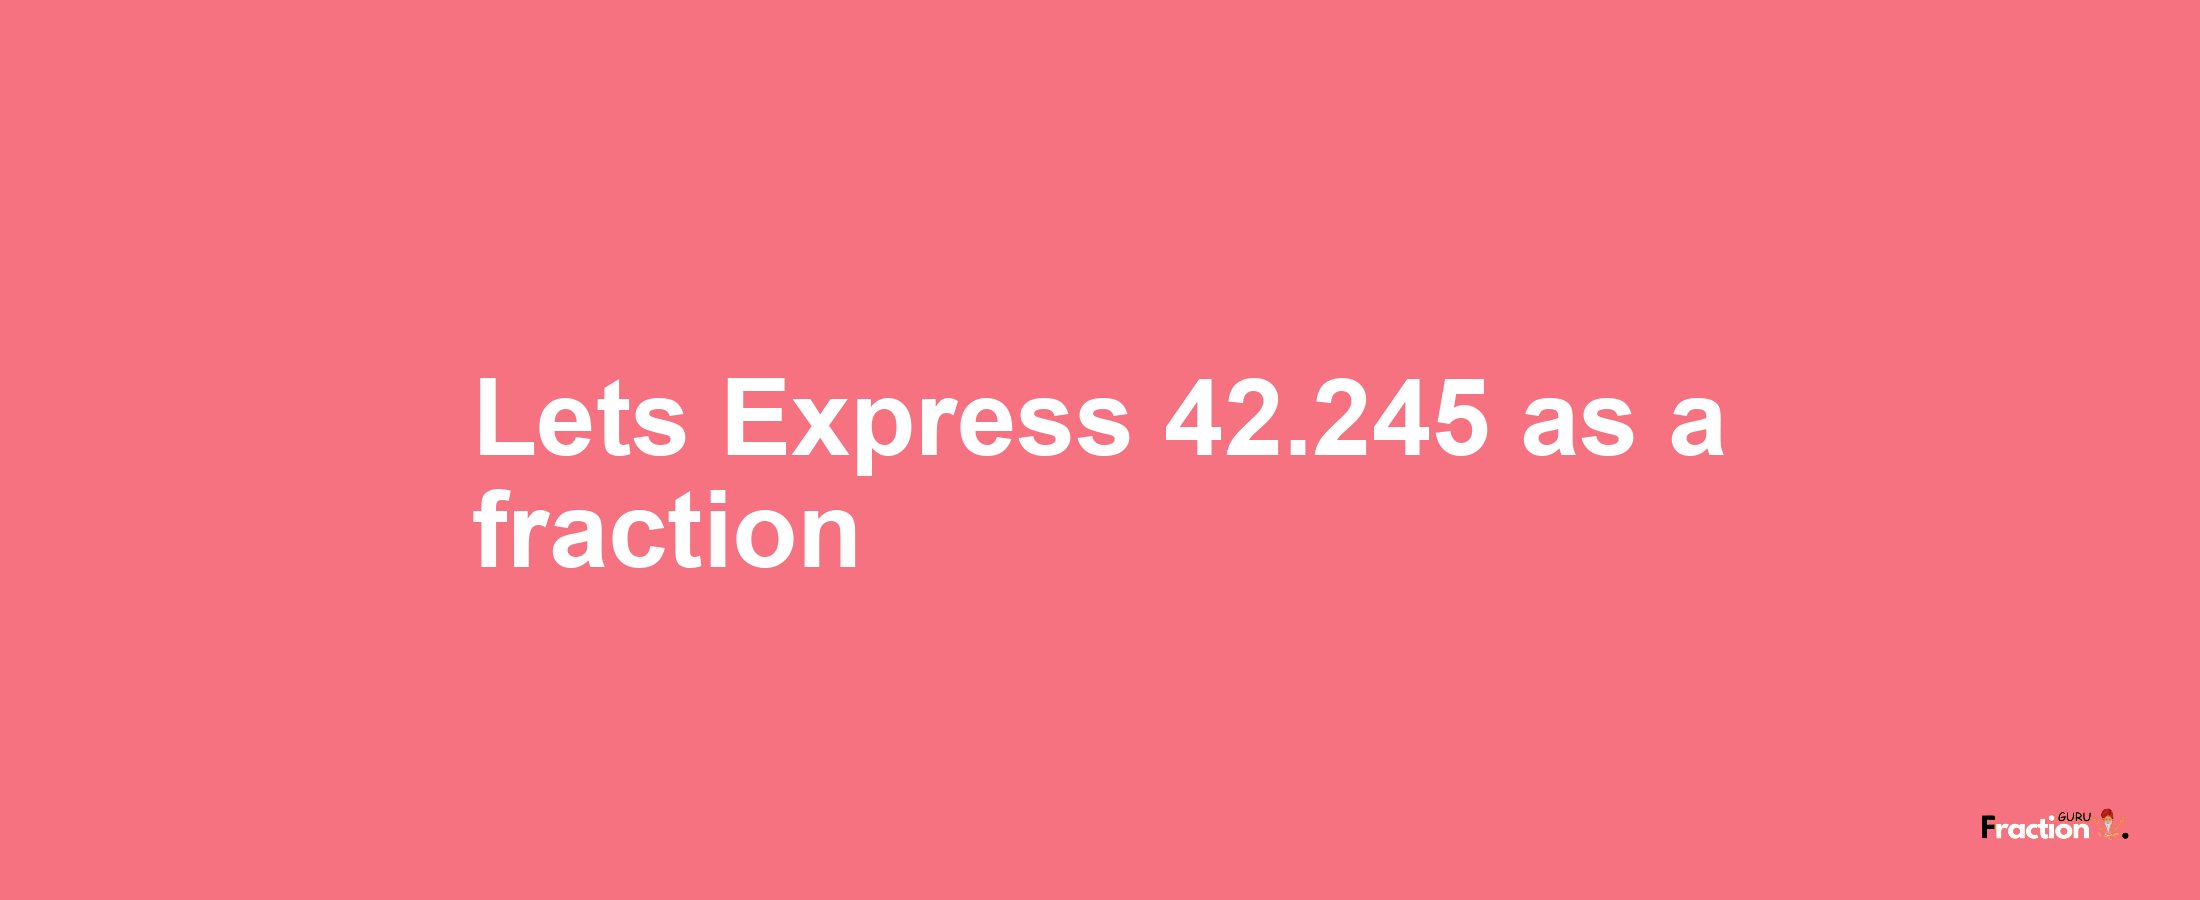 Lets Express 42.245 as afraction